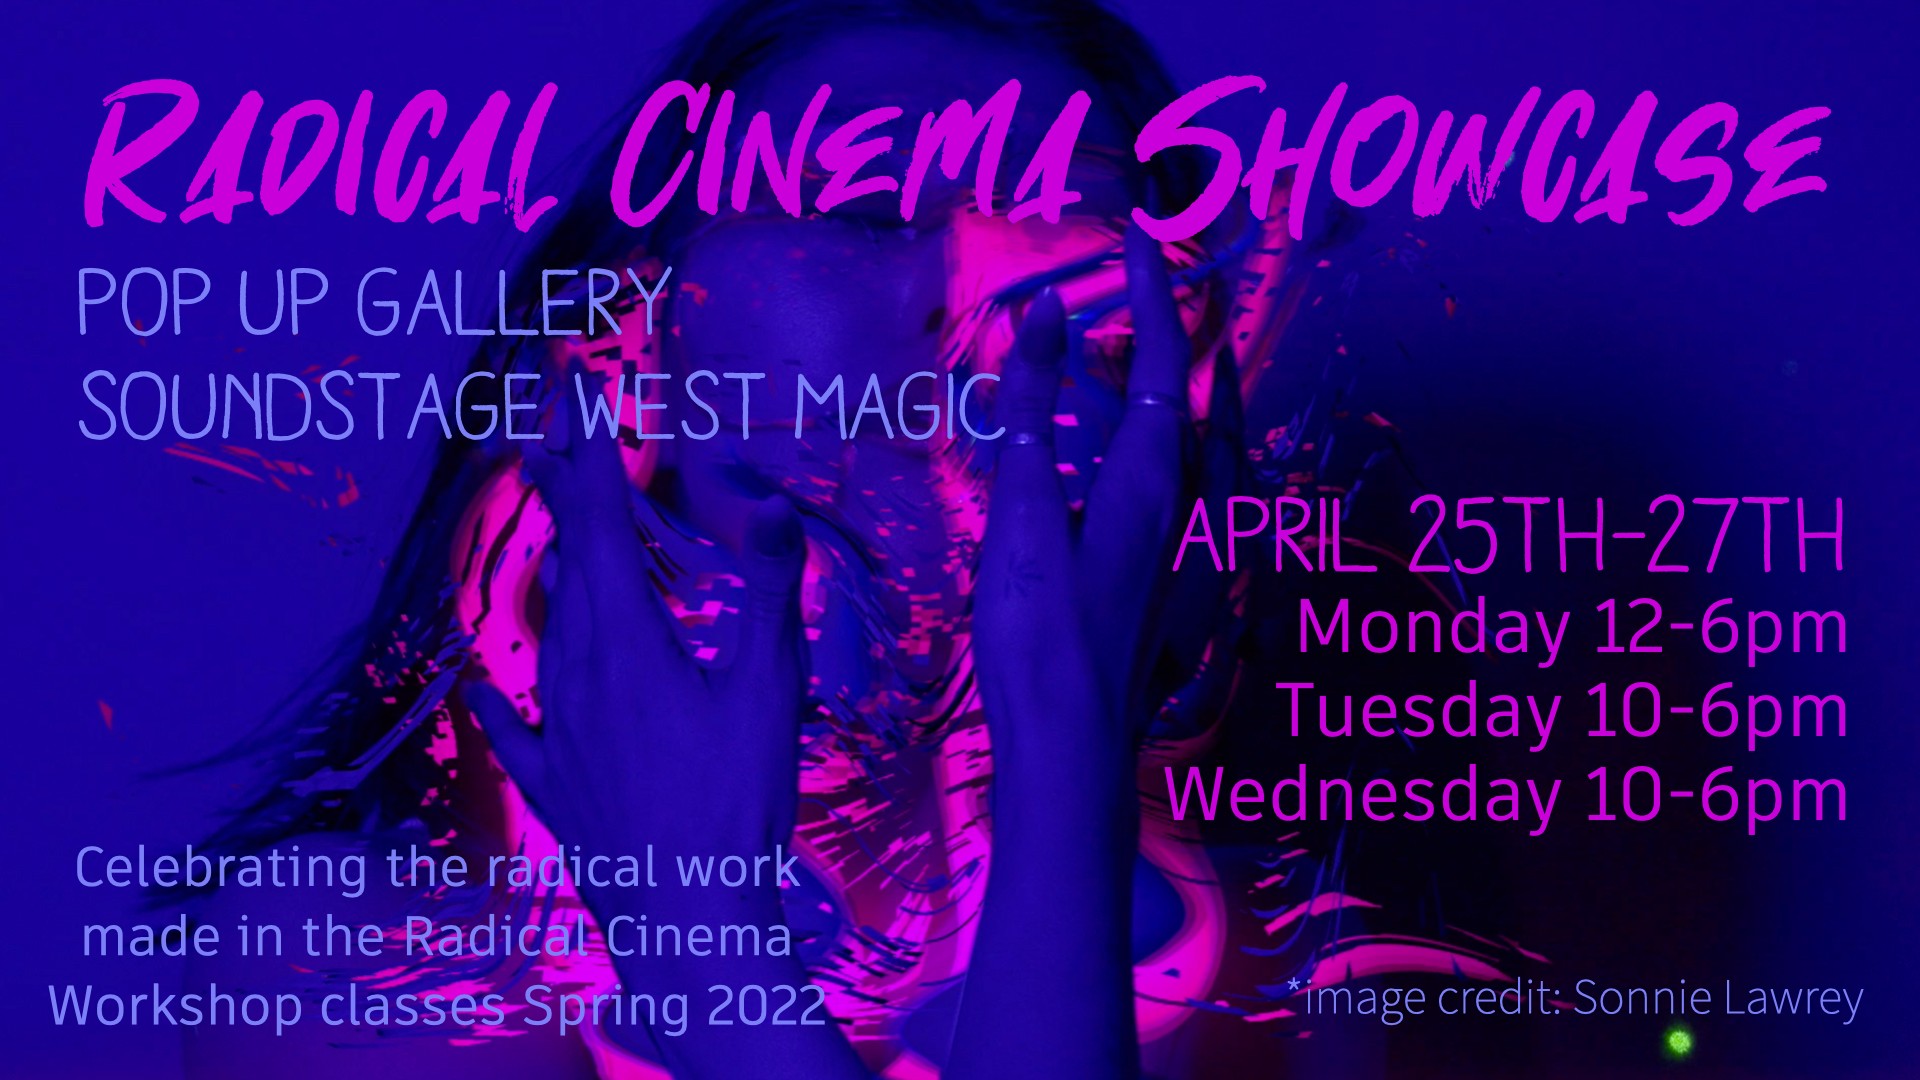 A blue- and purple-shaded graphic promoting the Radical Cinema Showcase.